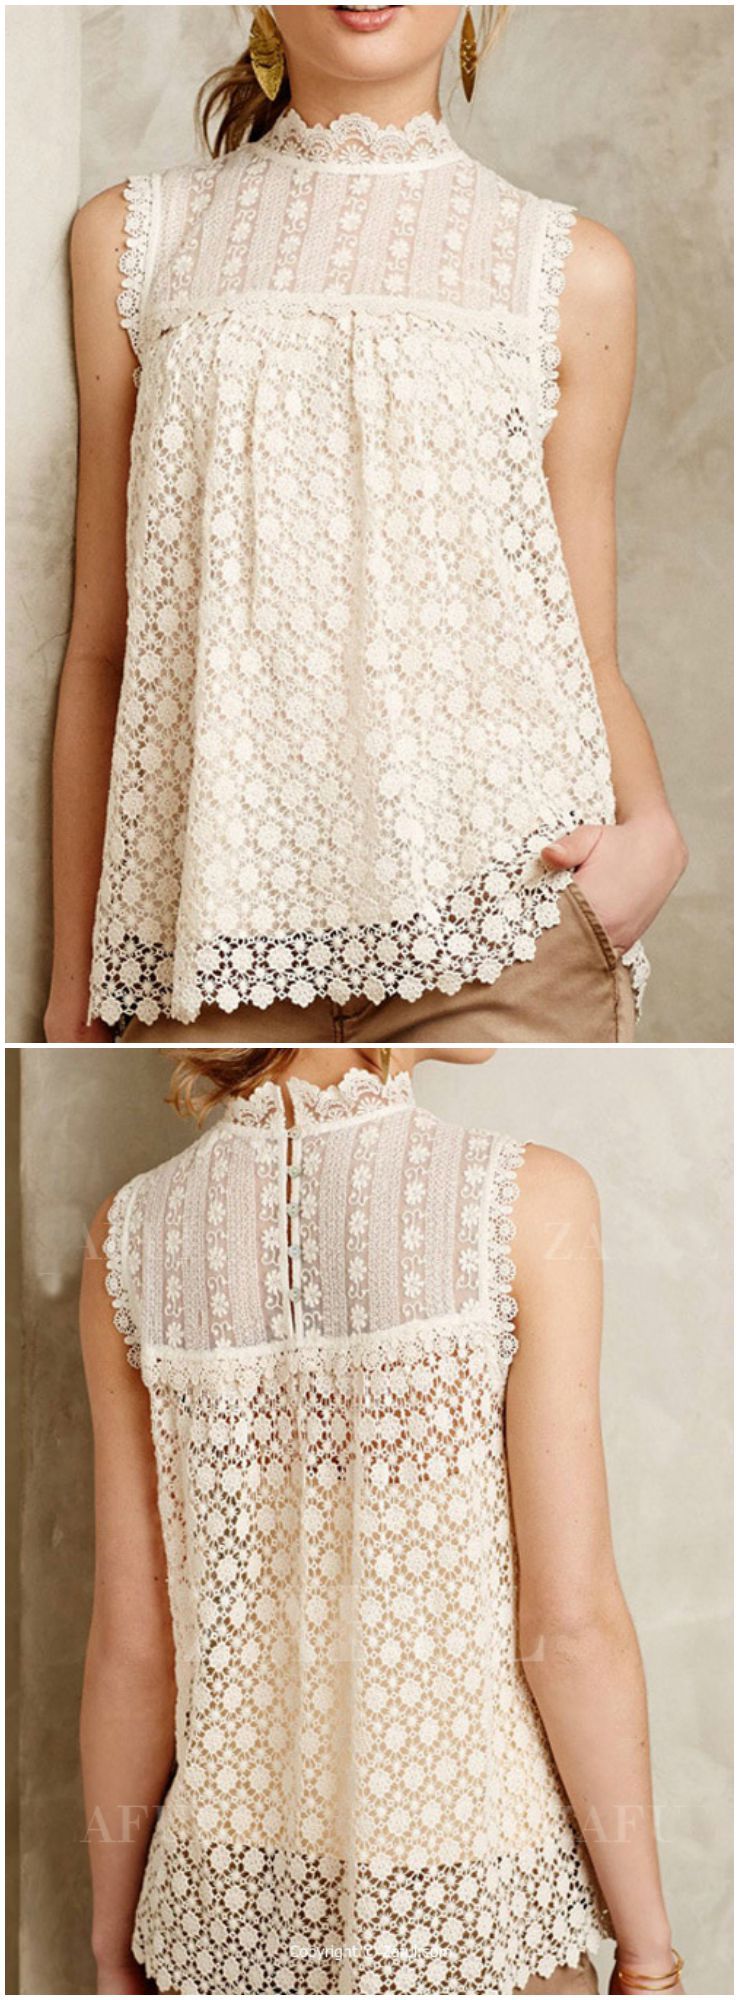 sleeveless lace blouse.  I love the high neckline.